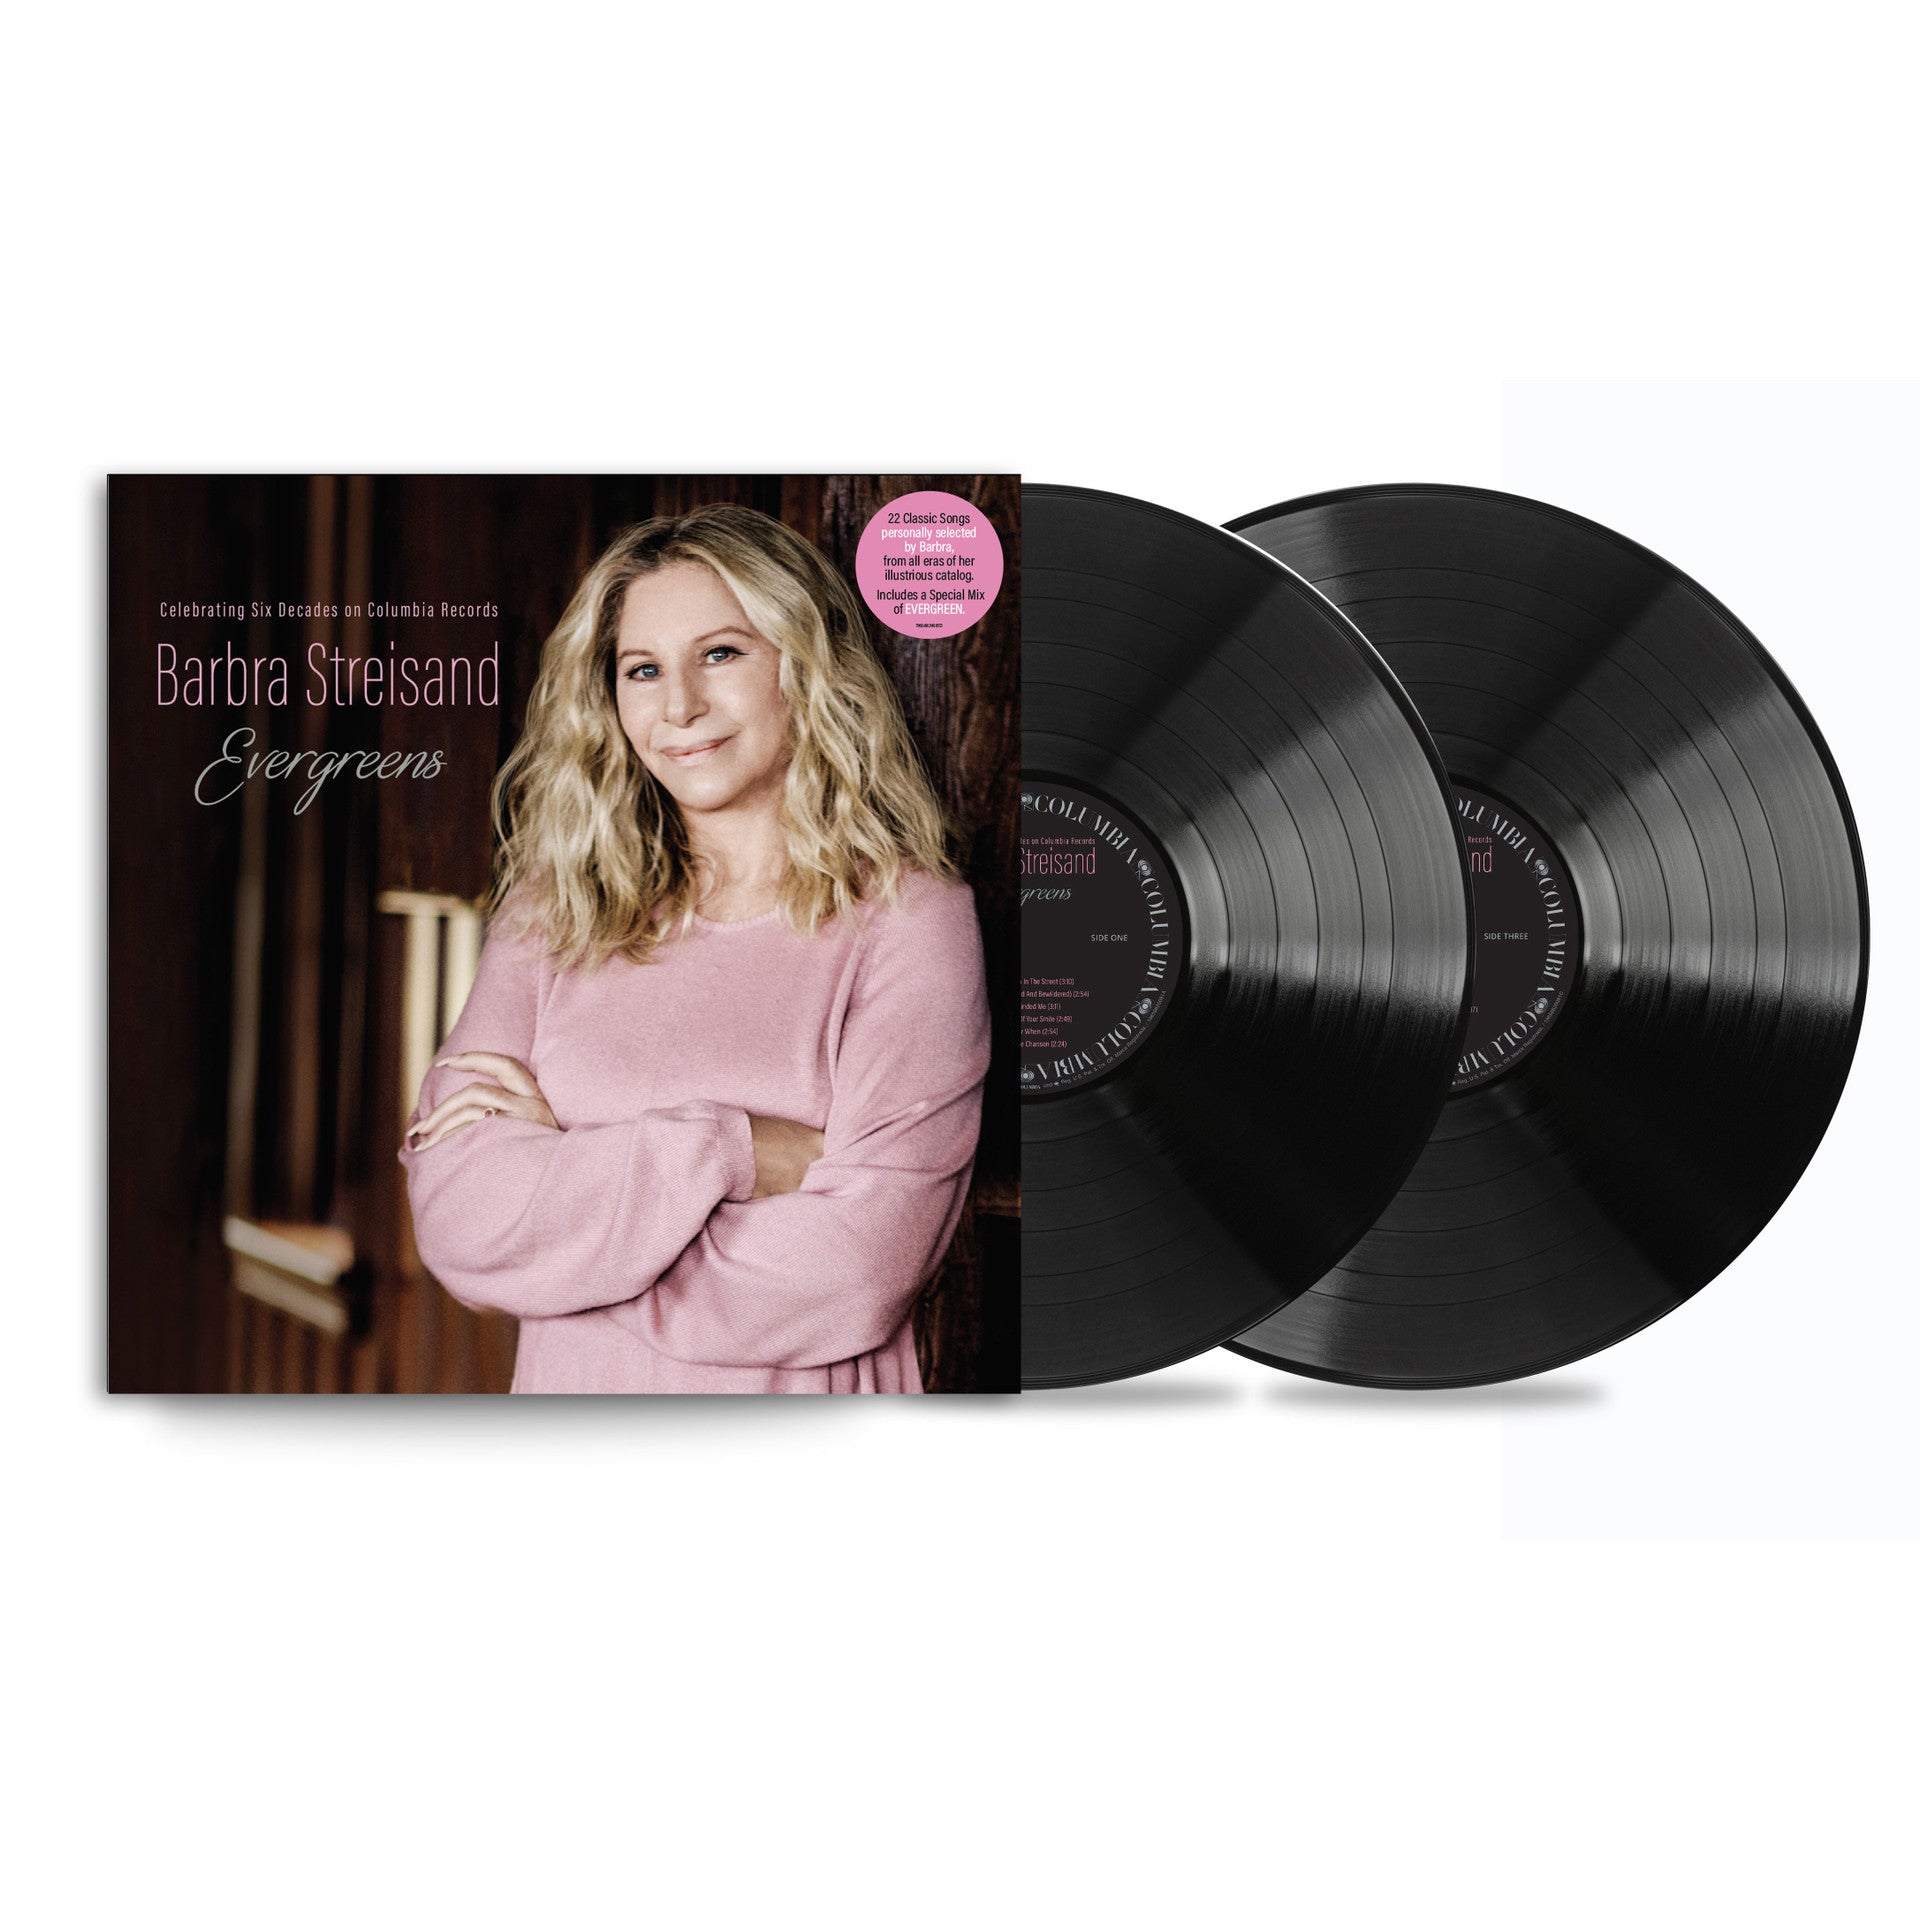 Barbra Streisand - Evergreens: Celebrating Six Decades On Columbia Records [2LP] (150 Gram, deep tracks, no tracks have appeared on previous Streisand compilation albums before)